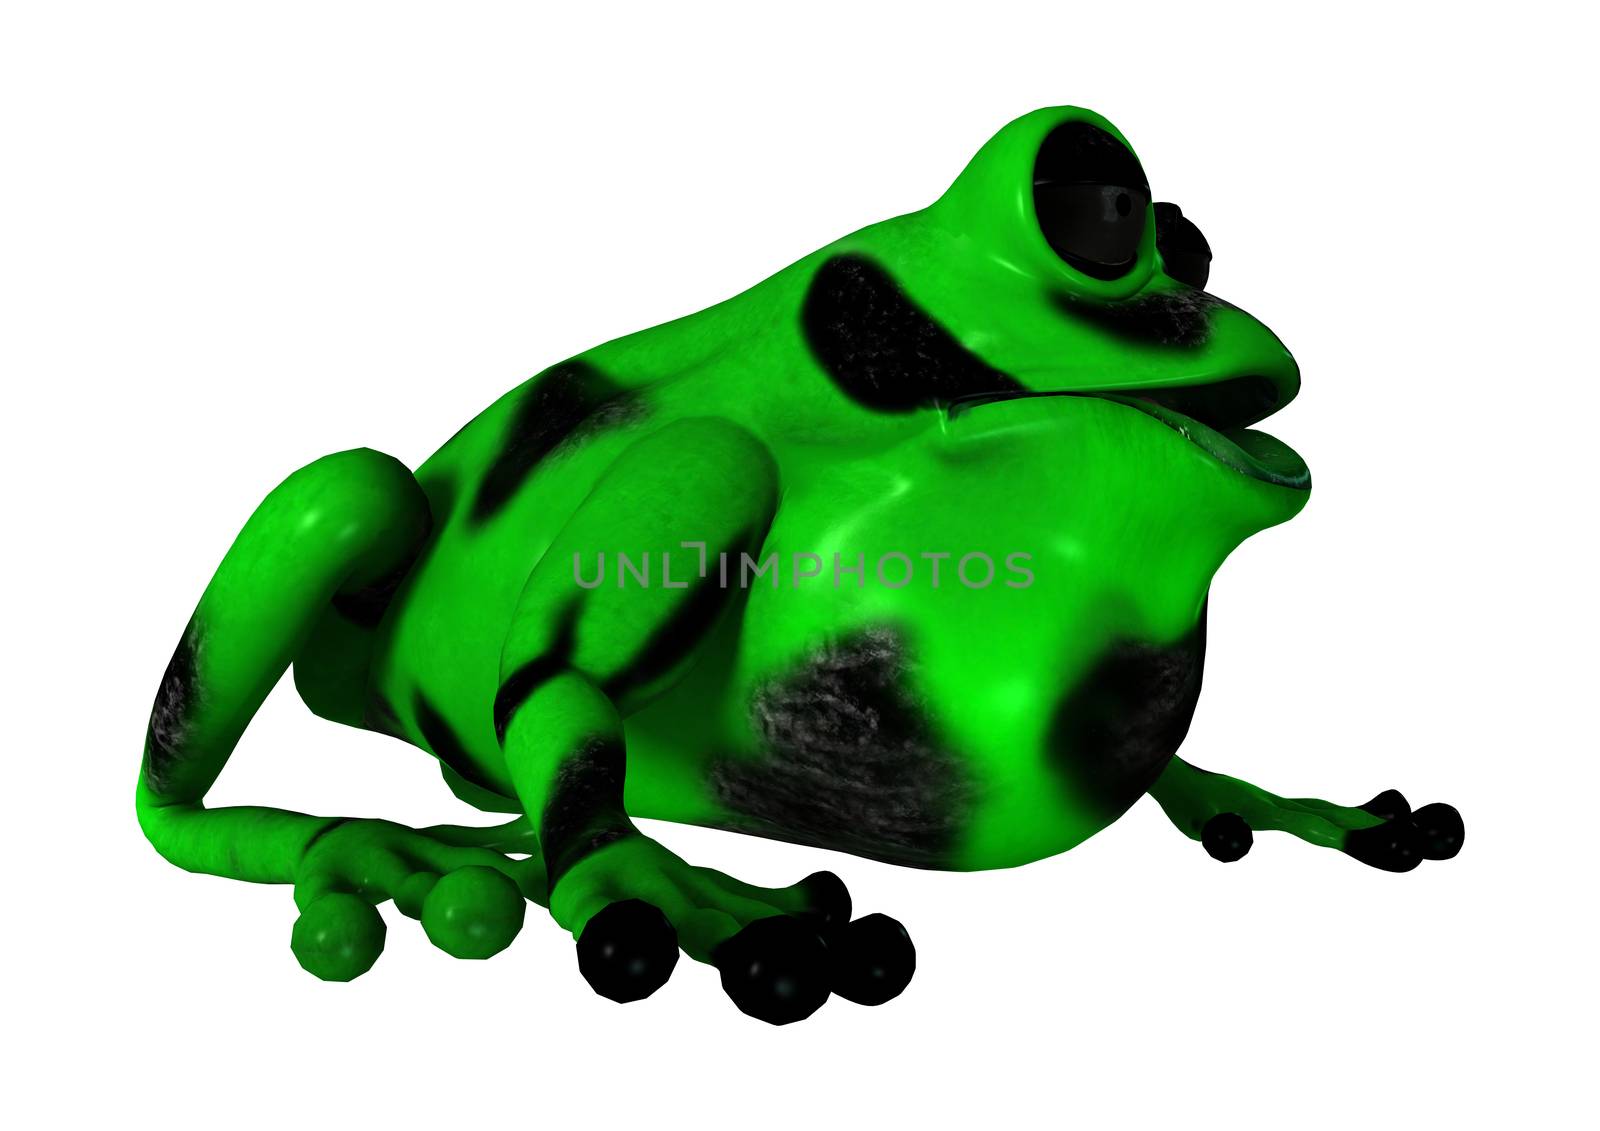 3D digital render of a green cartoon frog isolated on white background